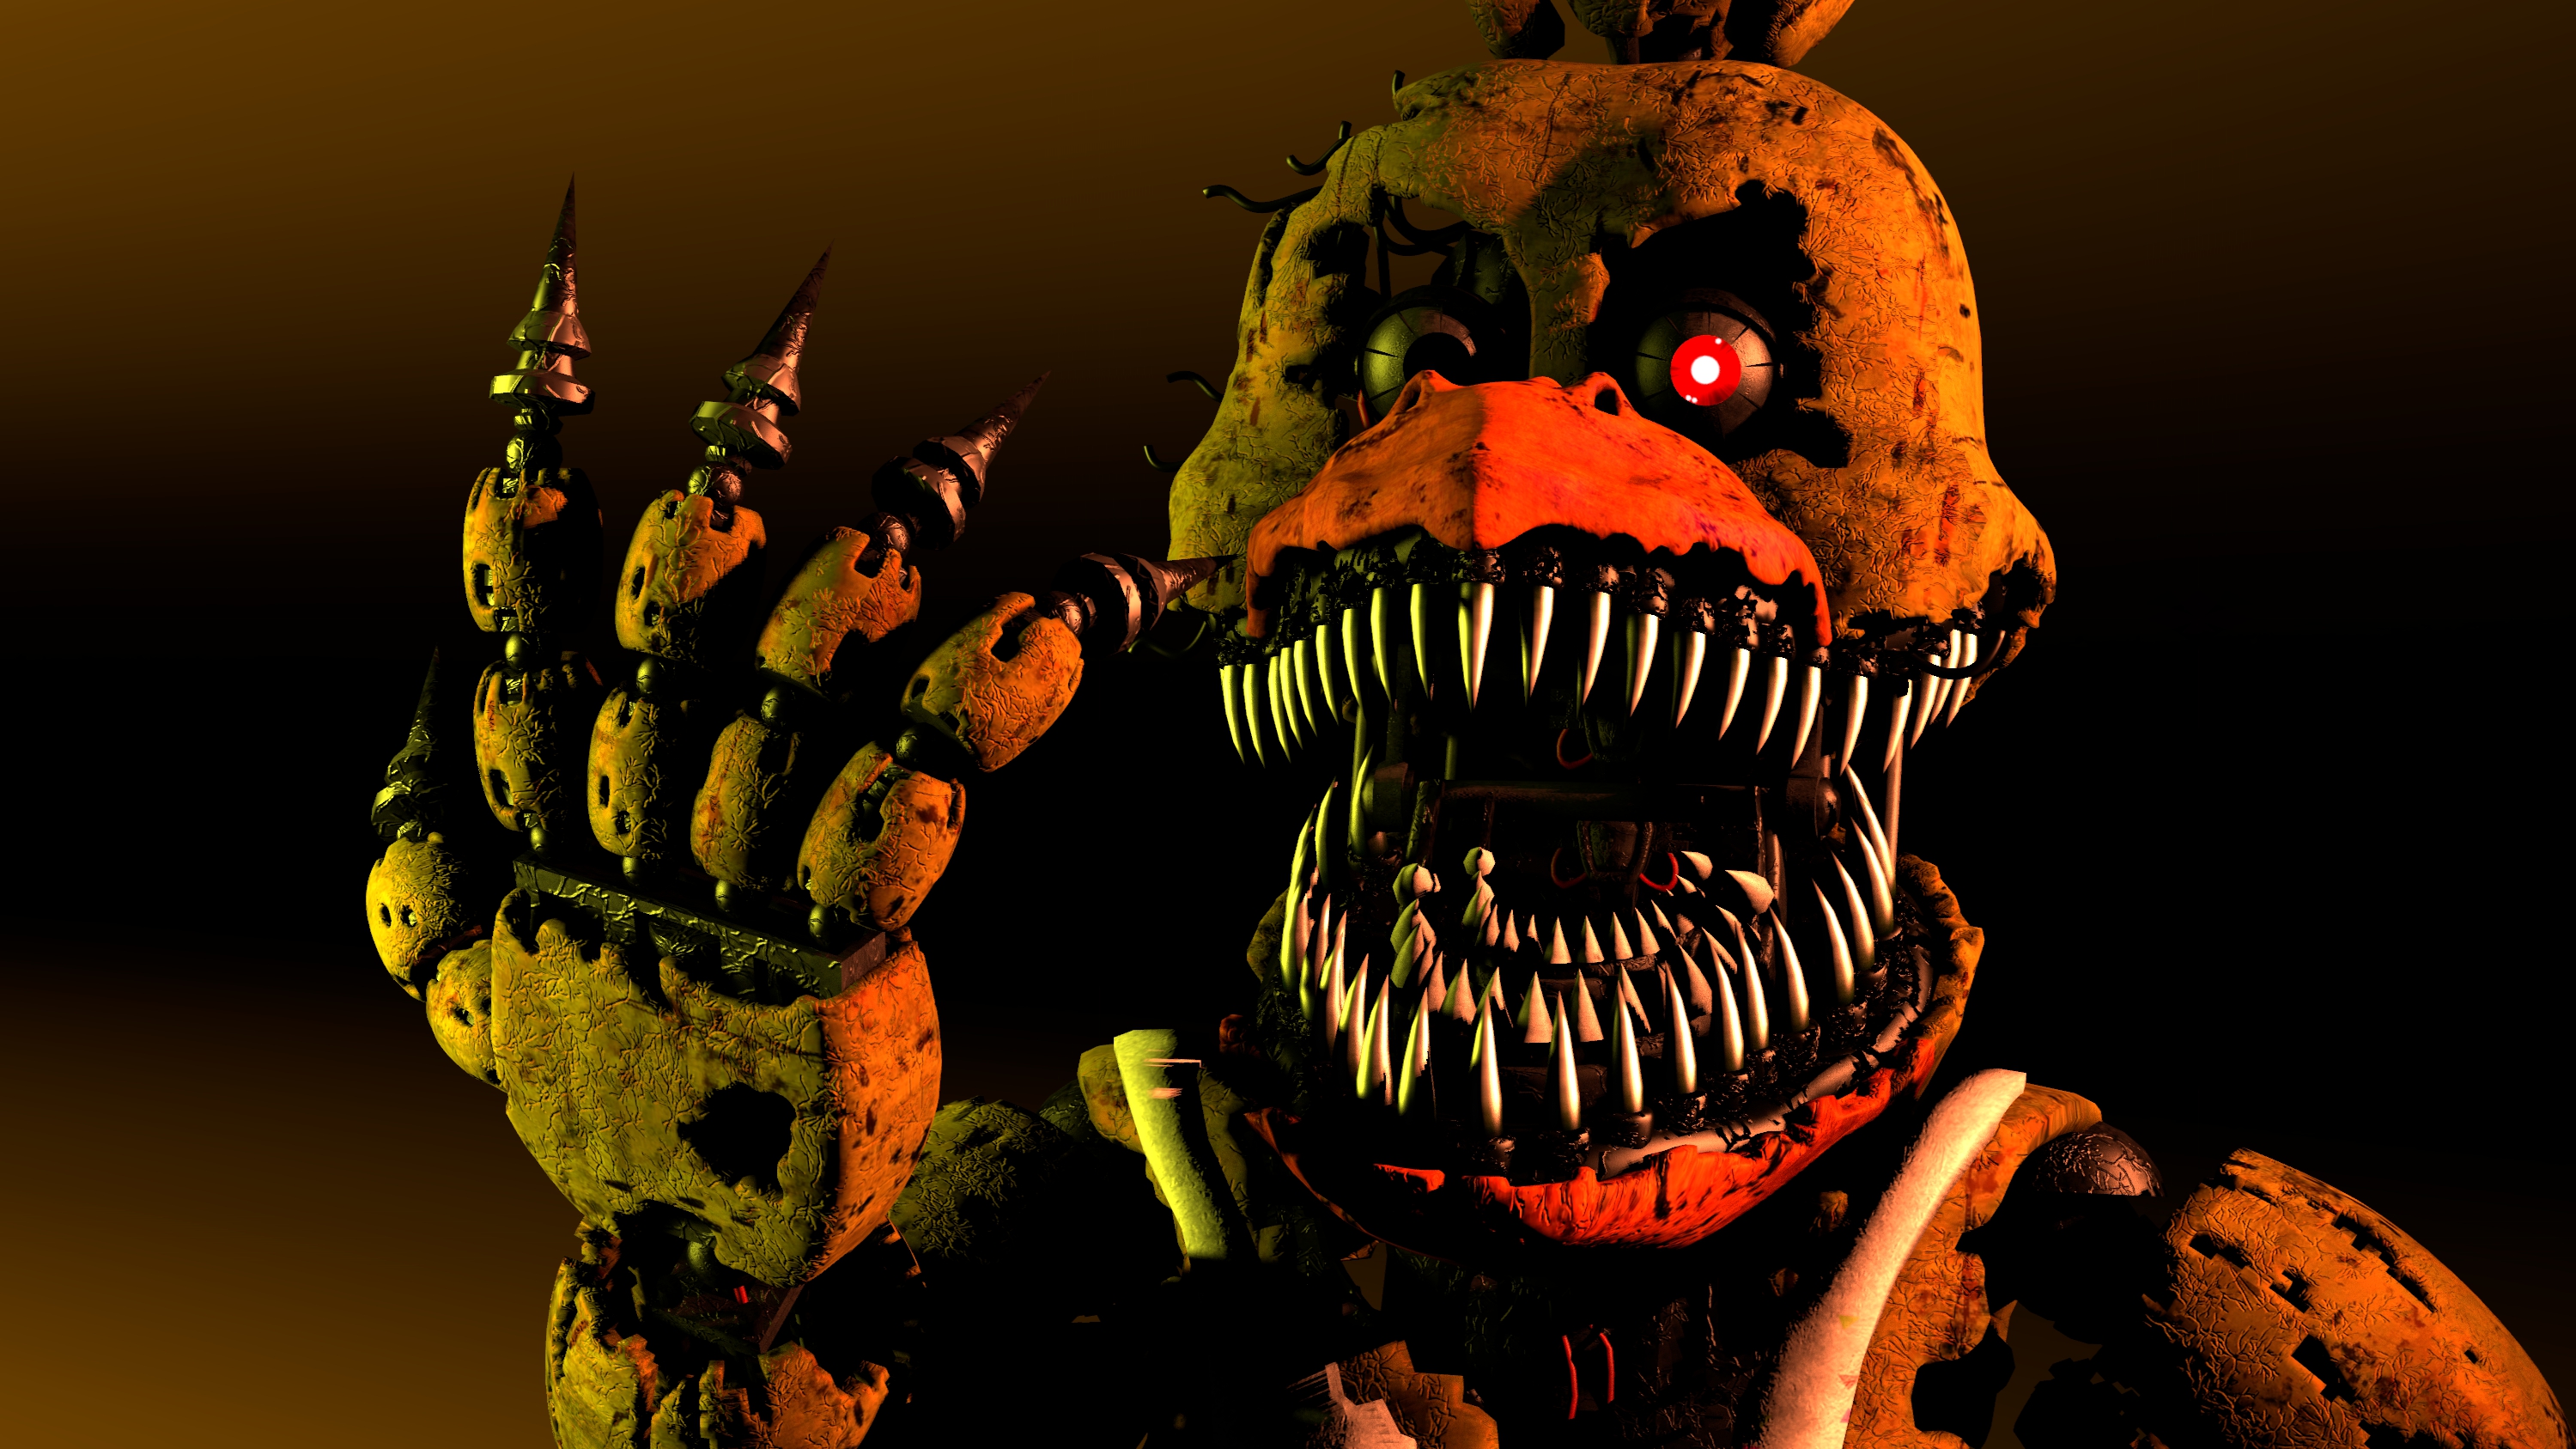 Five Nights At Freddys 4 Download Free